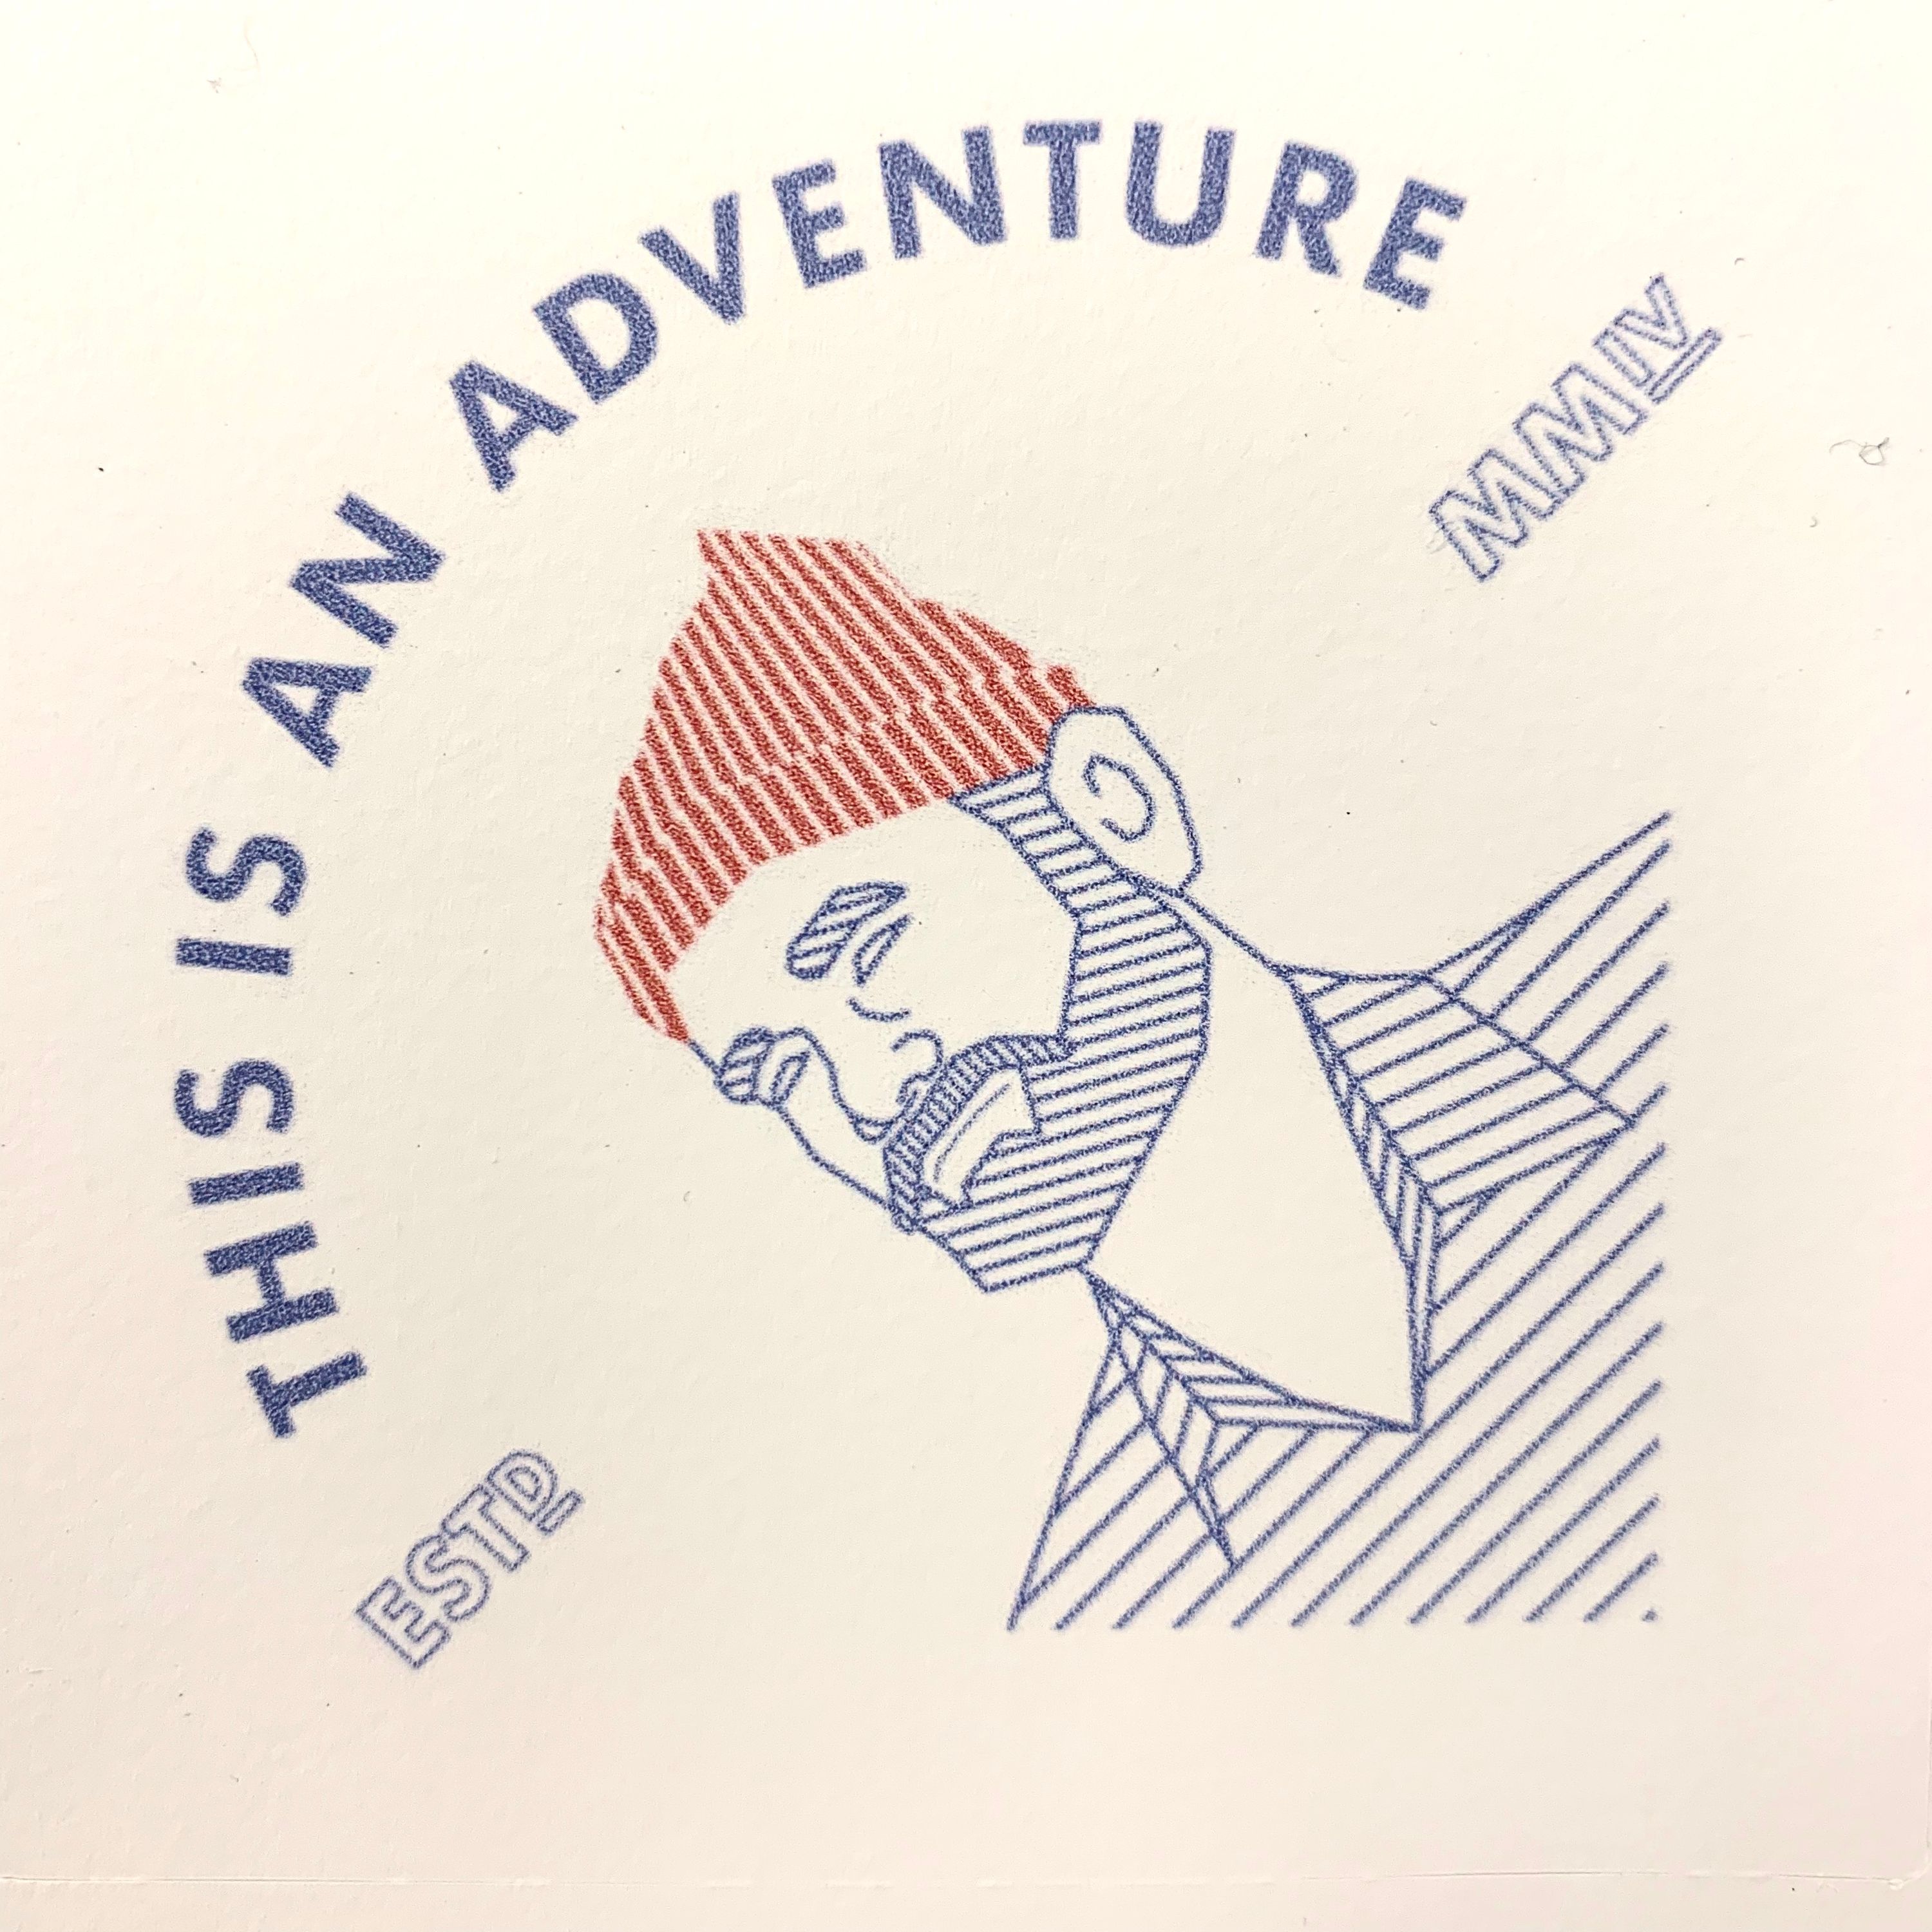 A sticker with Steve Zissou’s face and the words “This is an adventure”